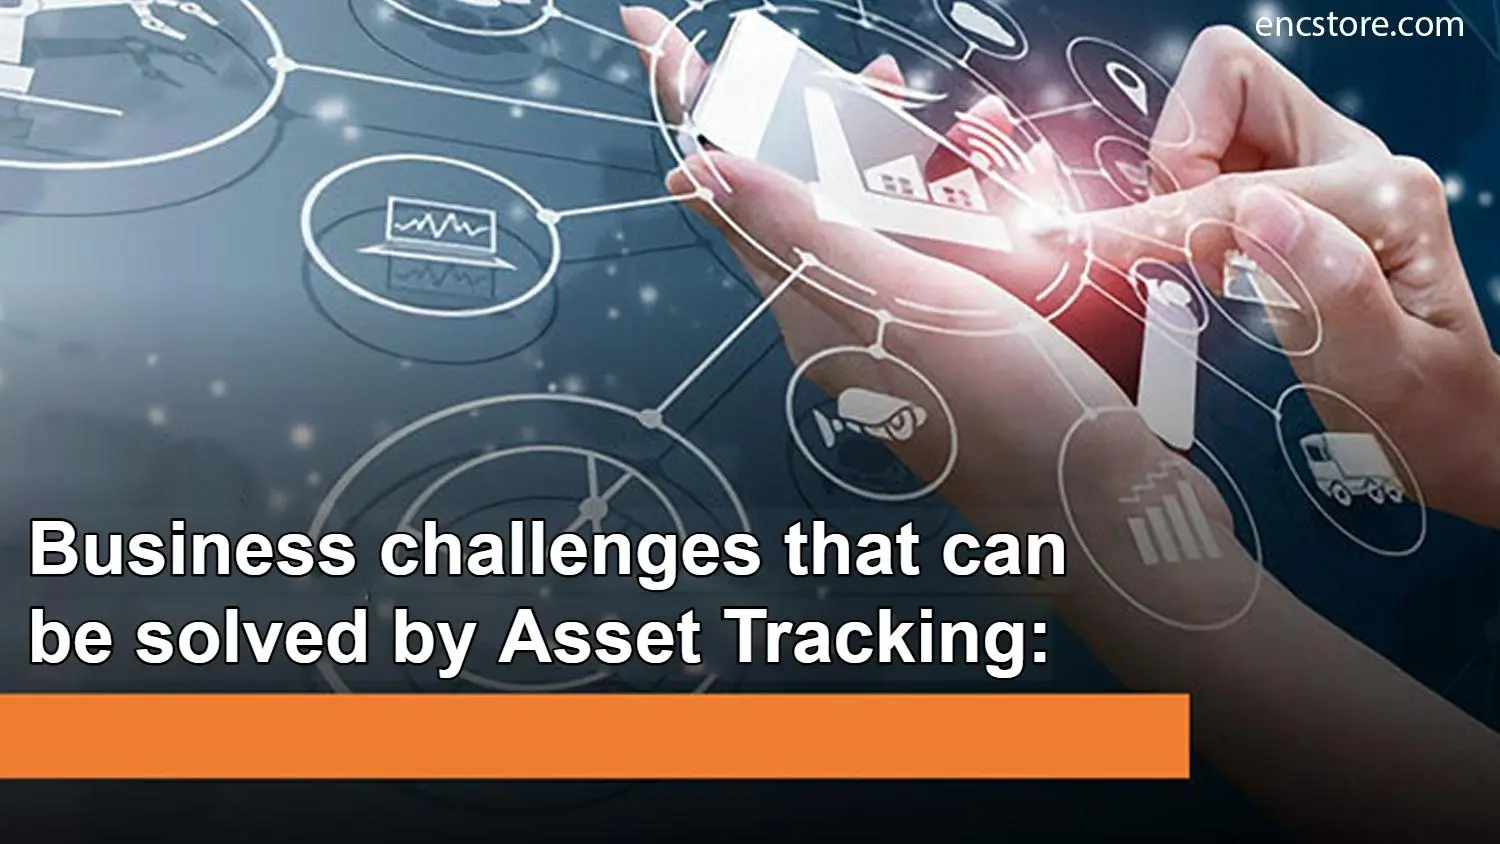 Business challenges that can be solved by Asset Tracking